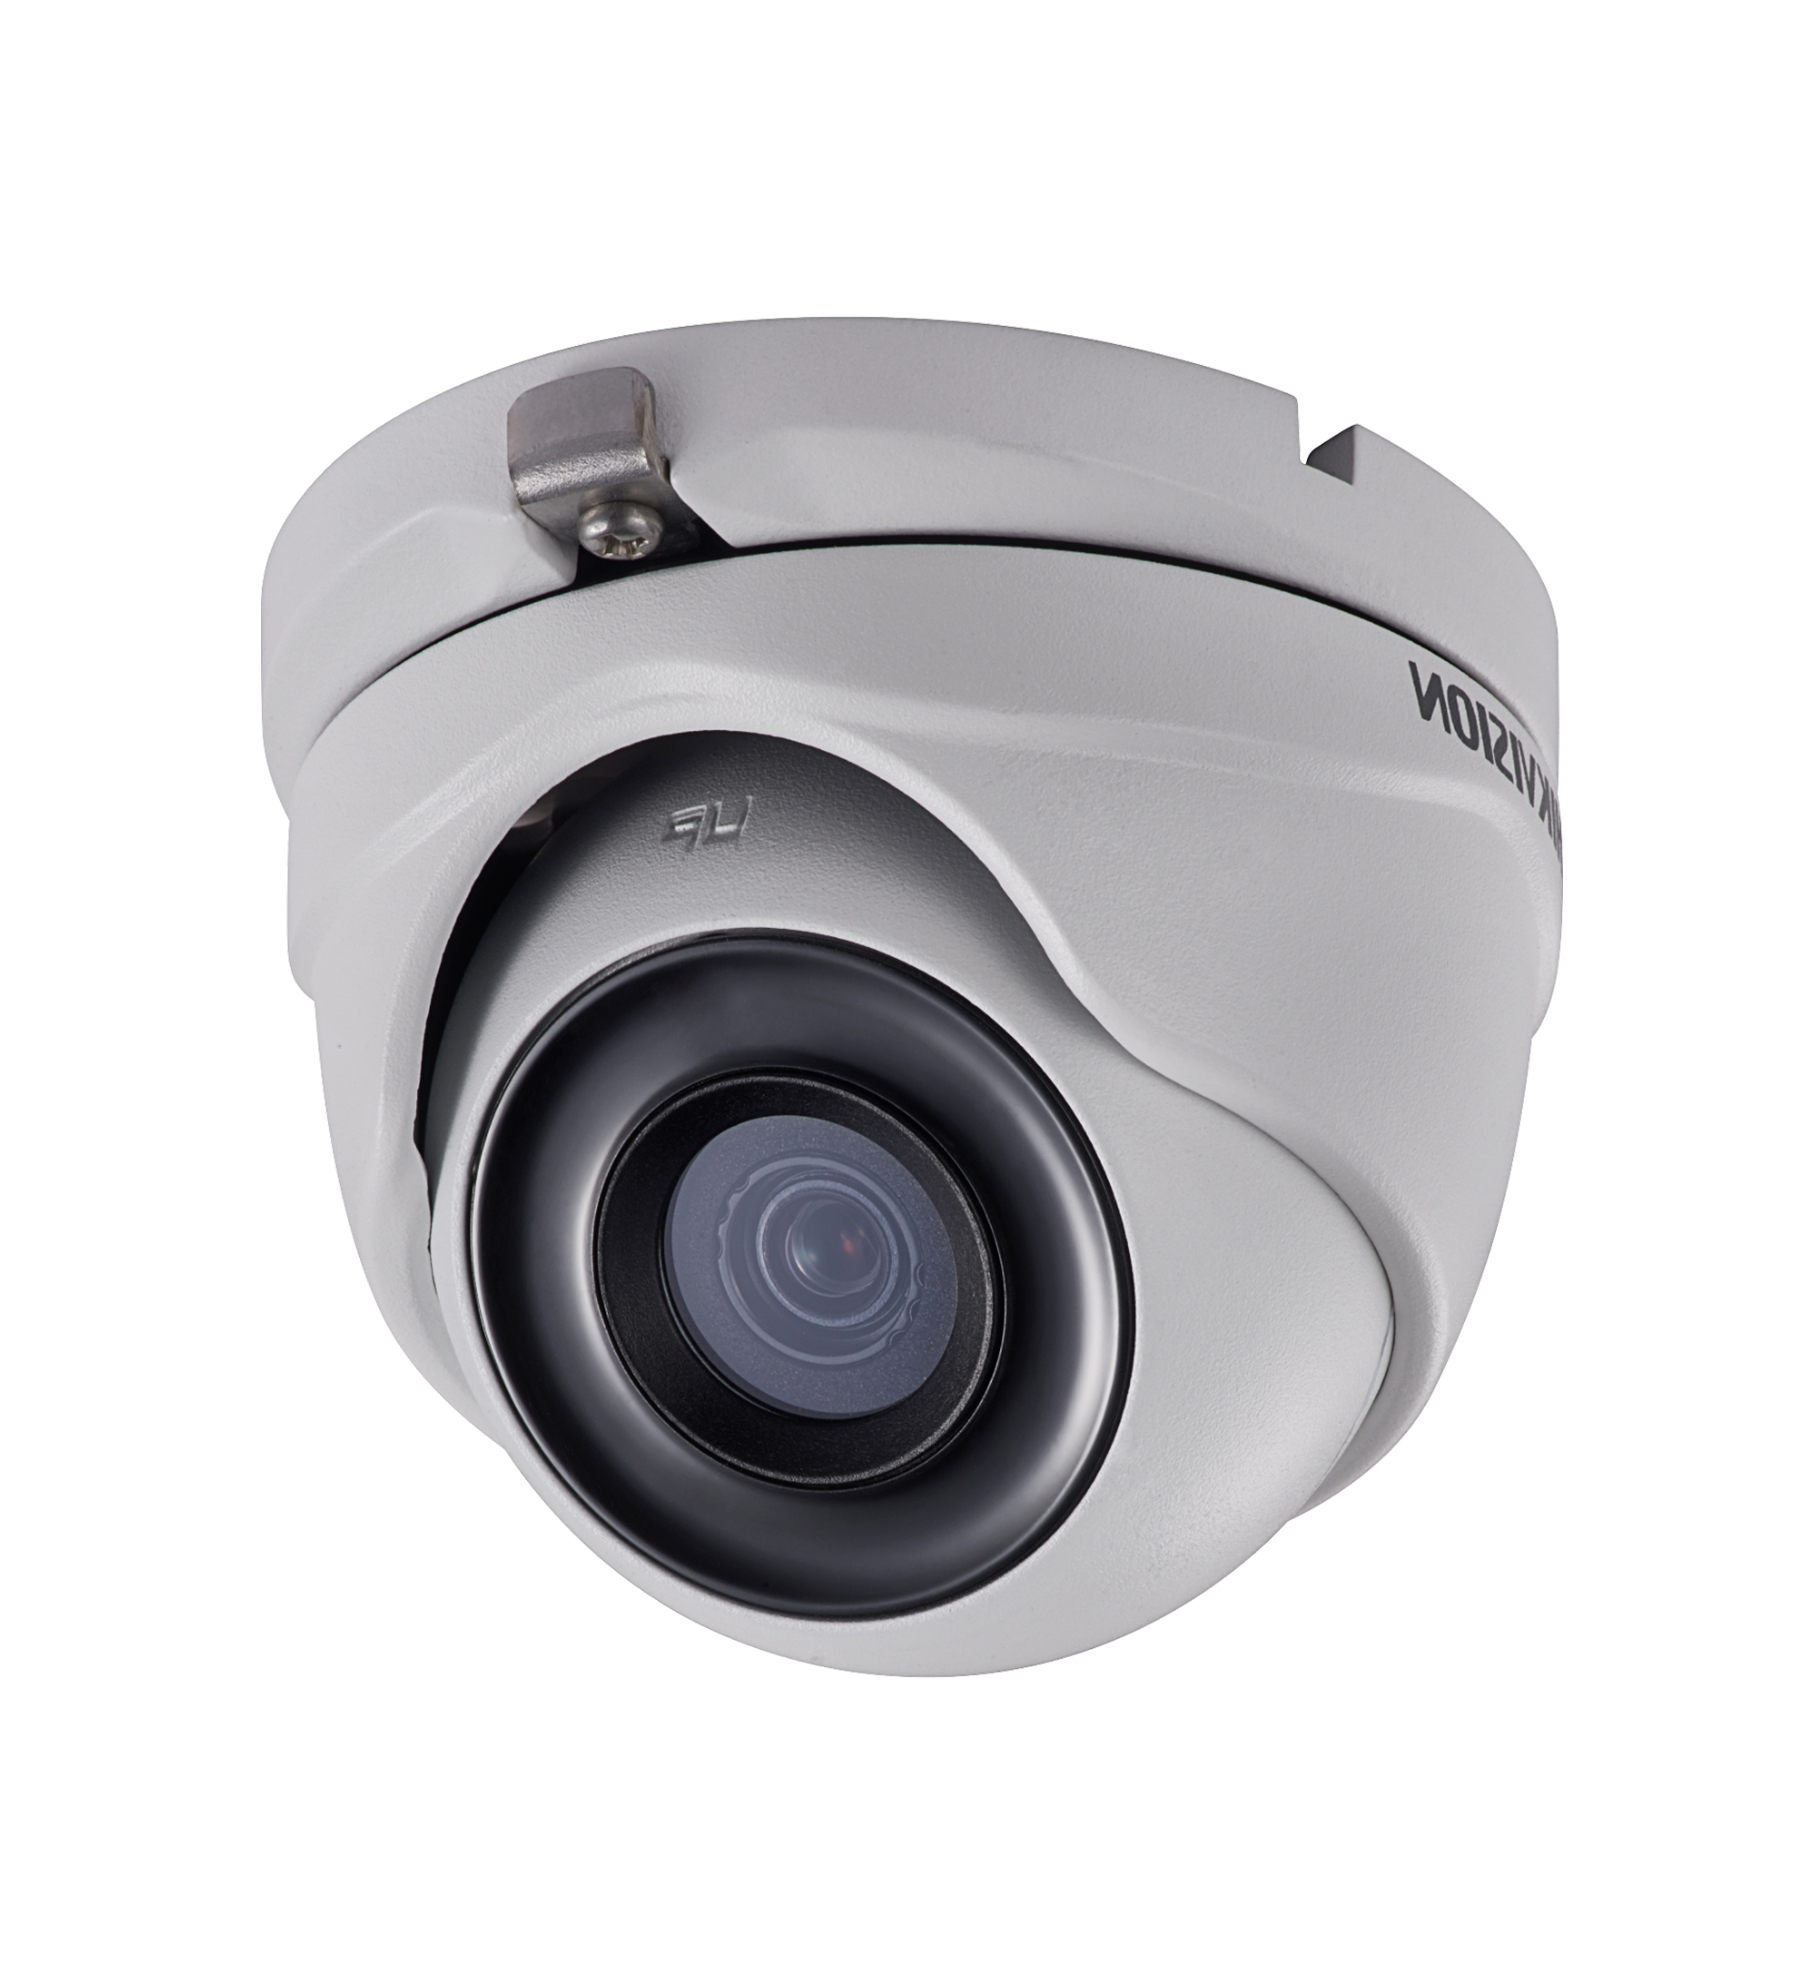 HIKVISION DS-2CE76D3T-ITMF​ Turbo HD Camera